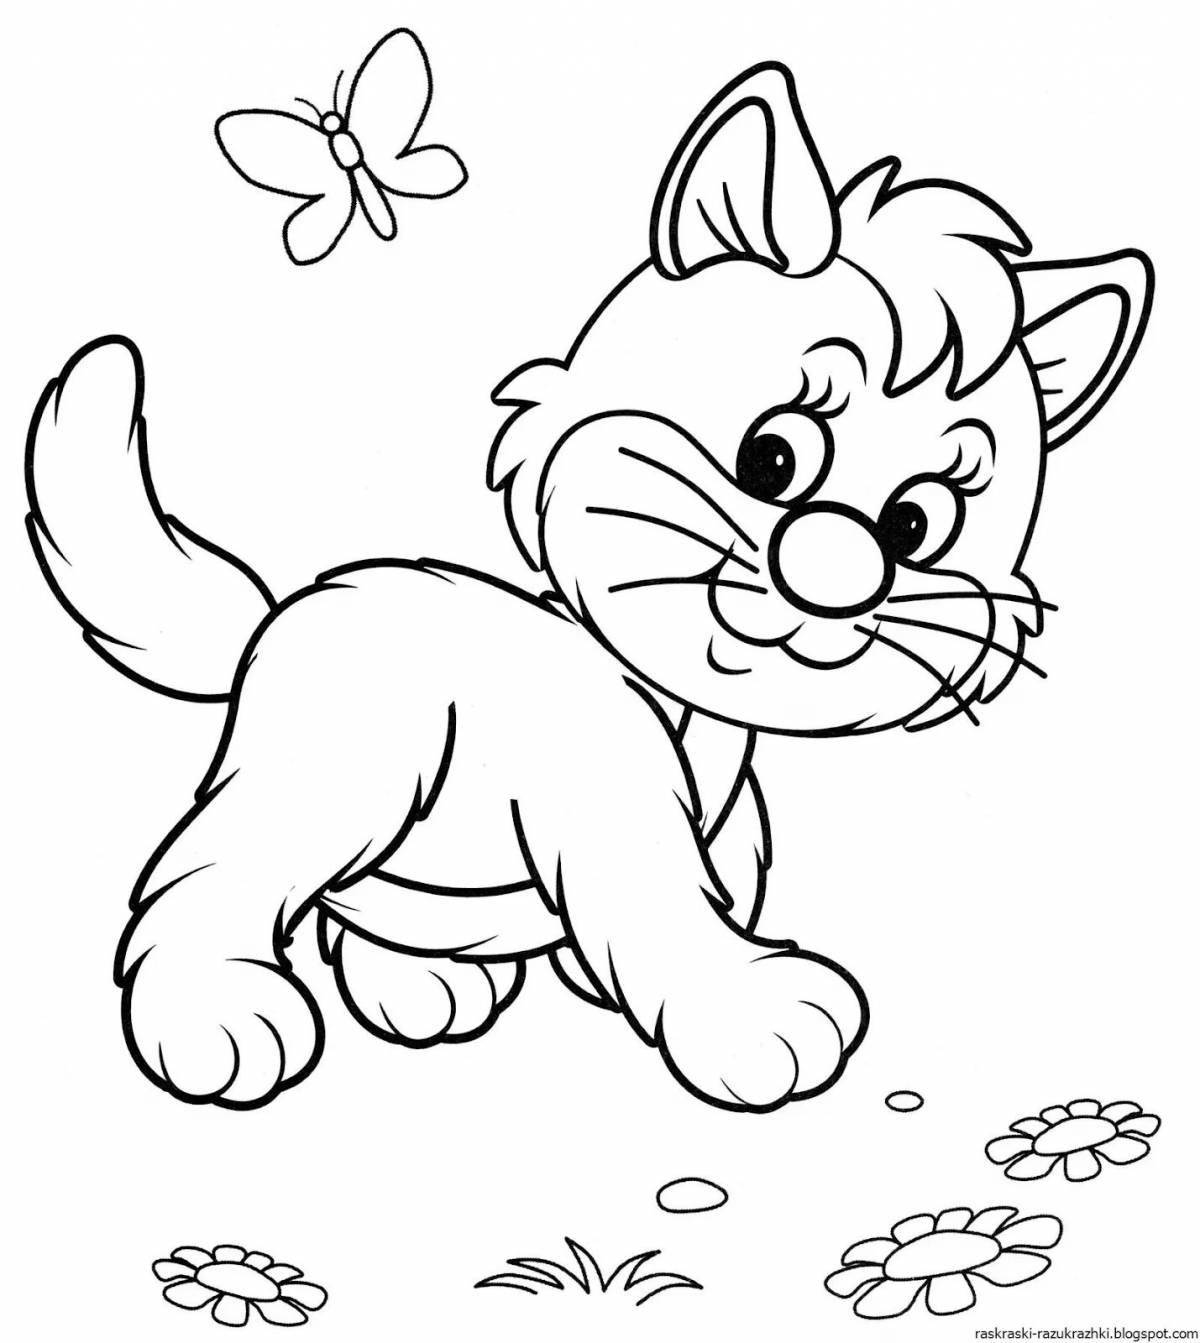 Violent kitty coloring book for 2-3 year olds